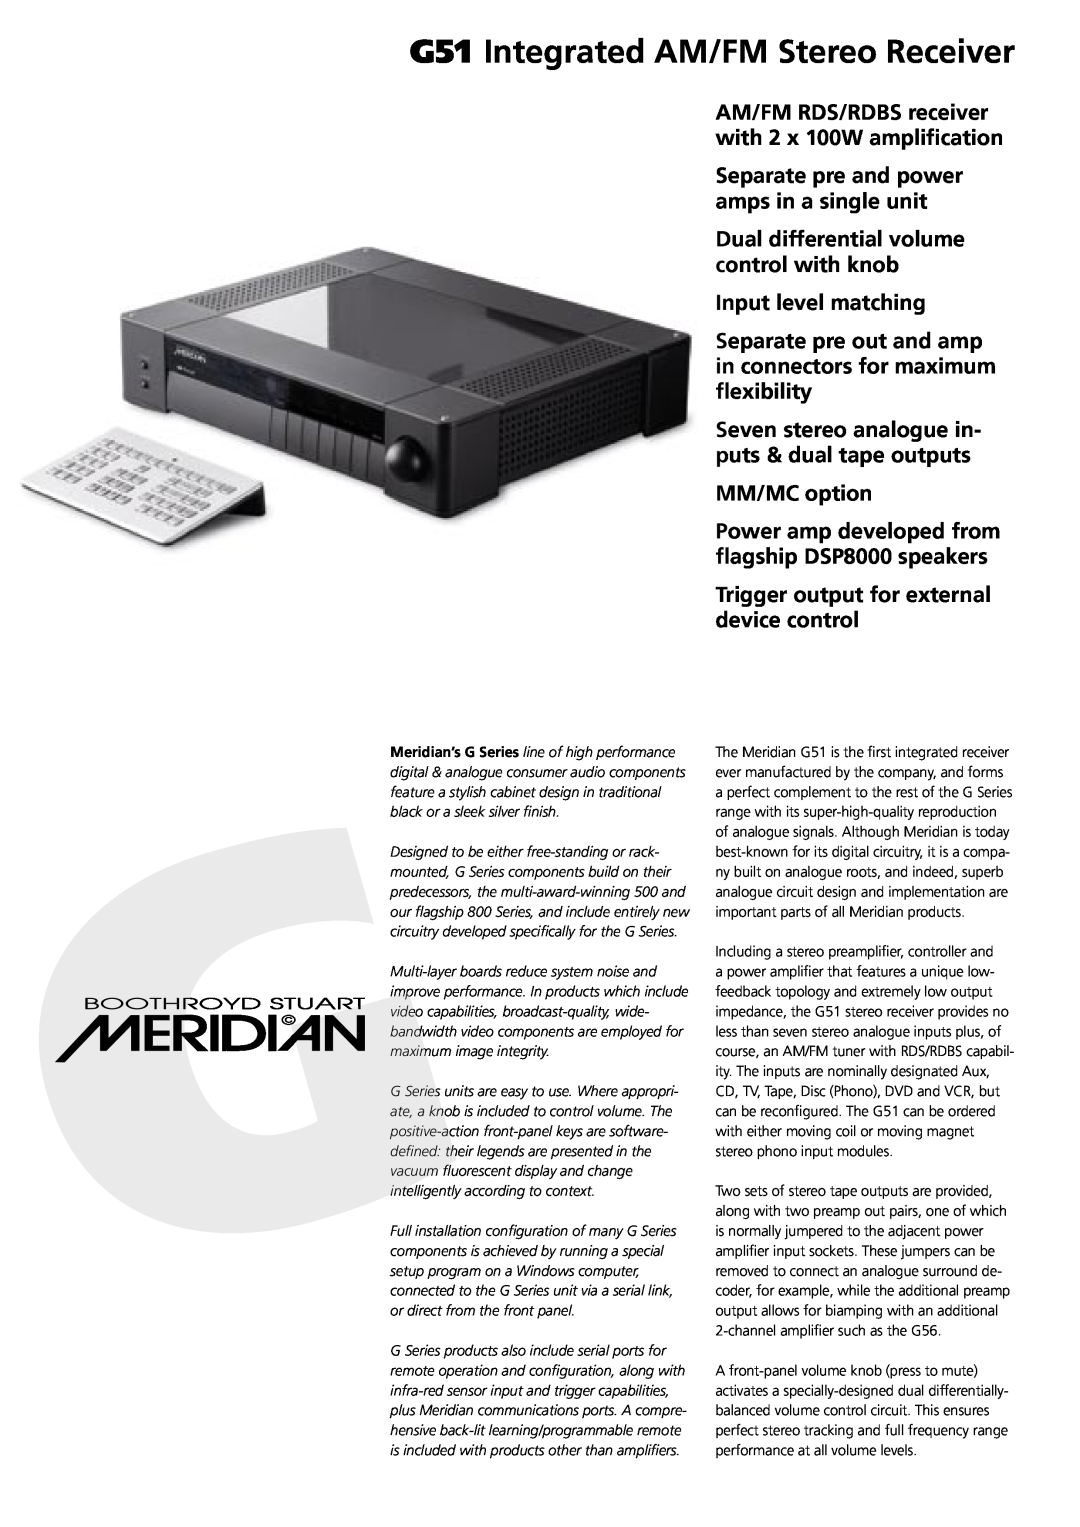 Meridian Audio manual G51 Integrated AM/FM Stereo Receiver, Separate pre and power amps in a single unit, MM/MC option 